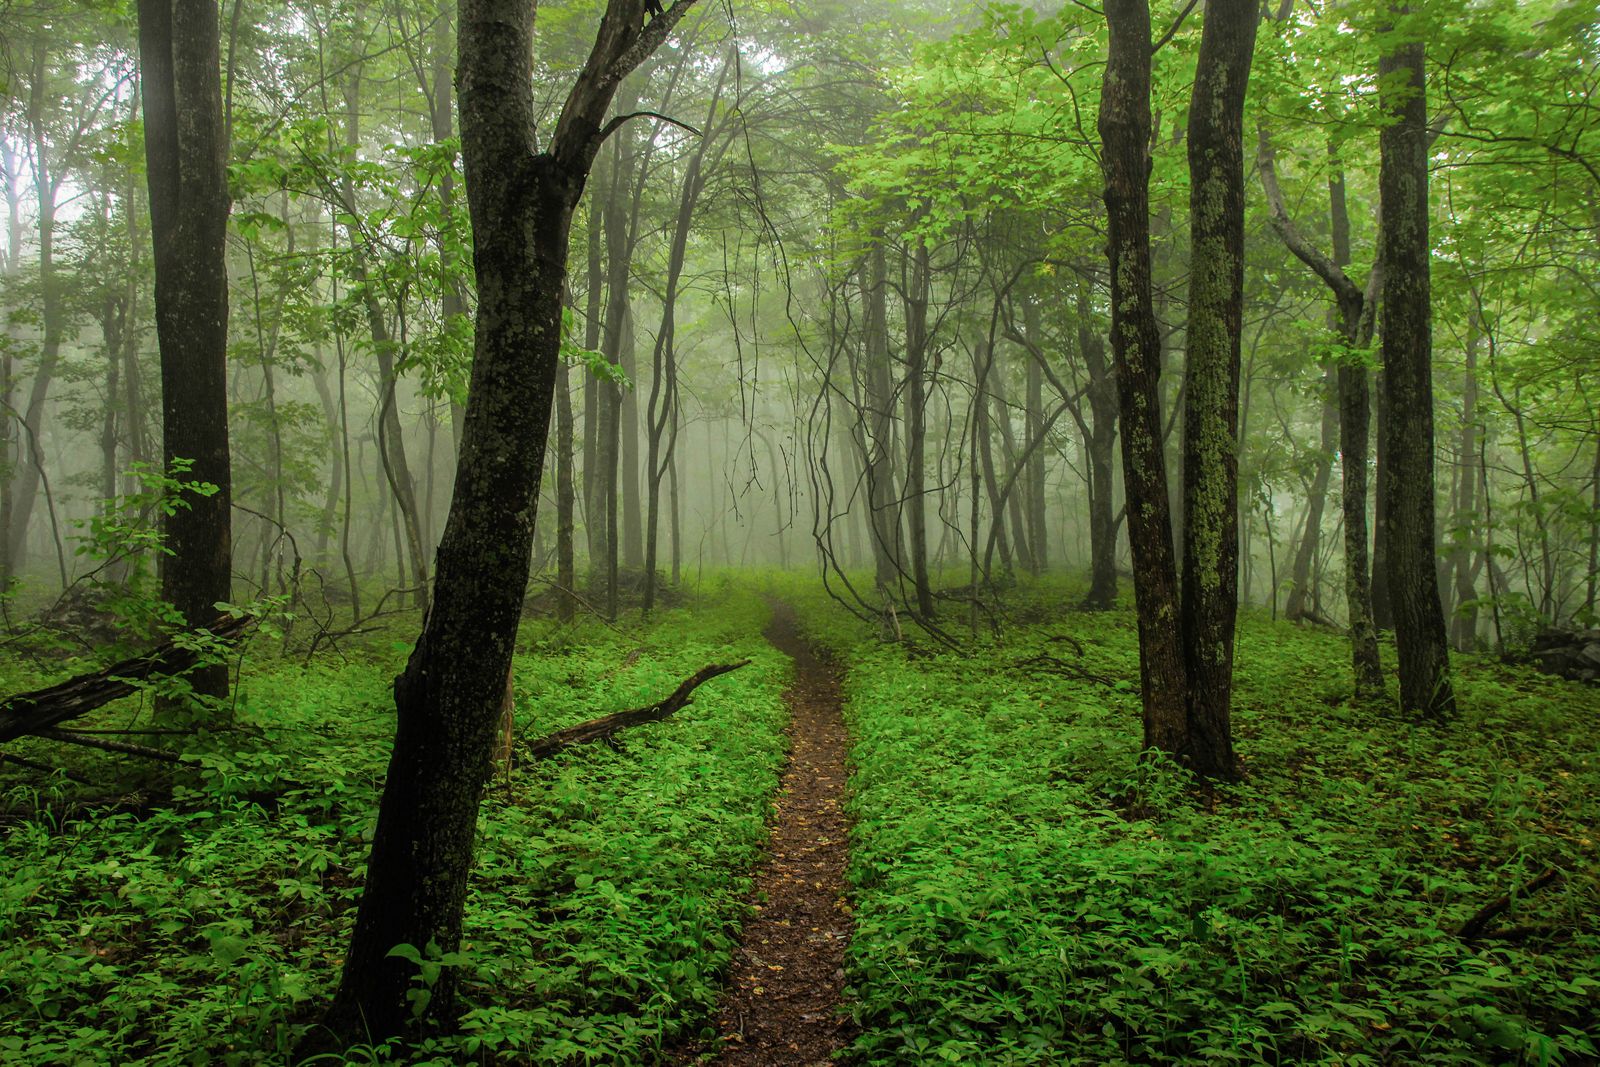 Path leading through a green, misty forest.